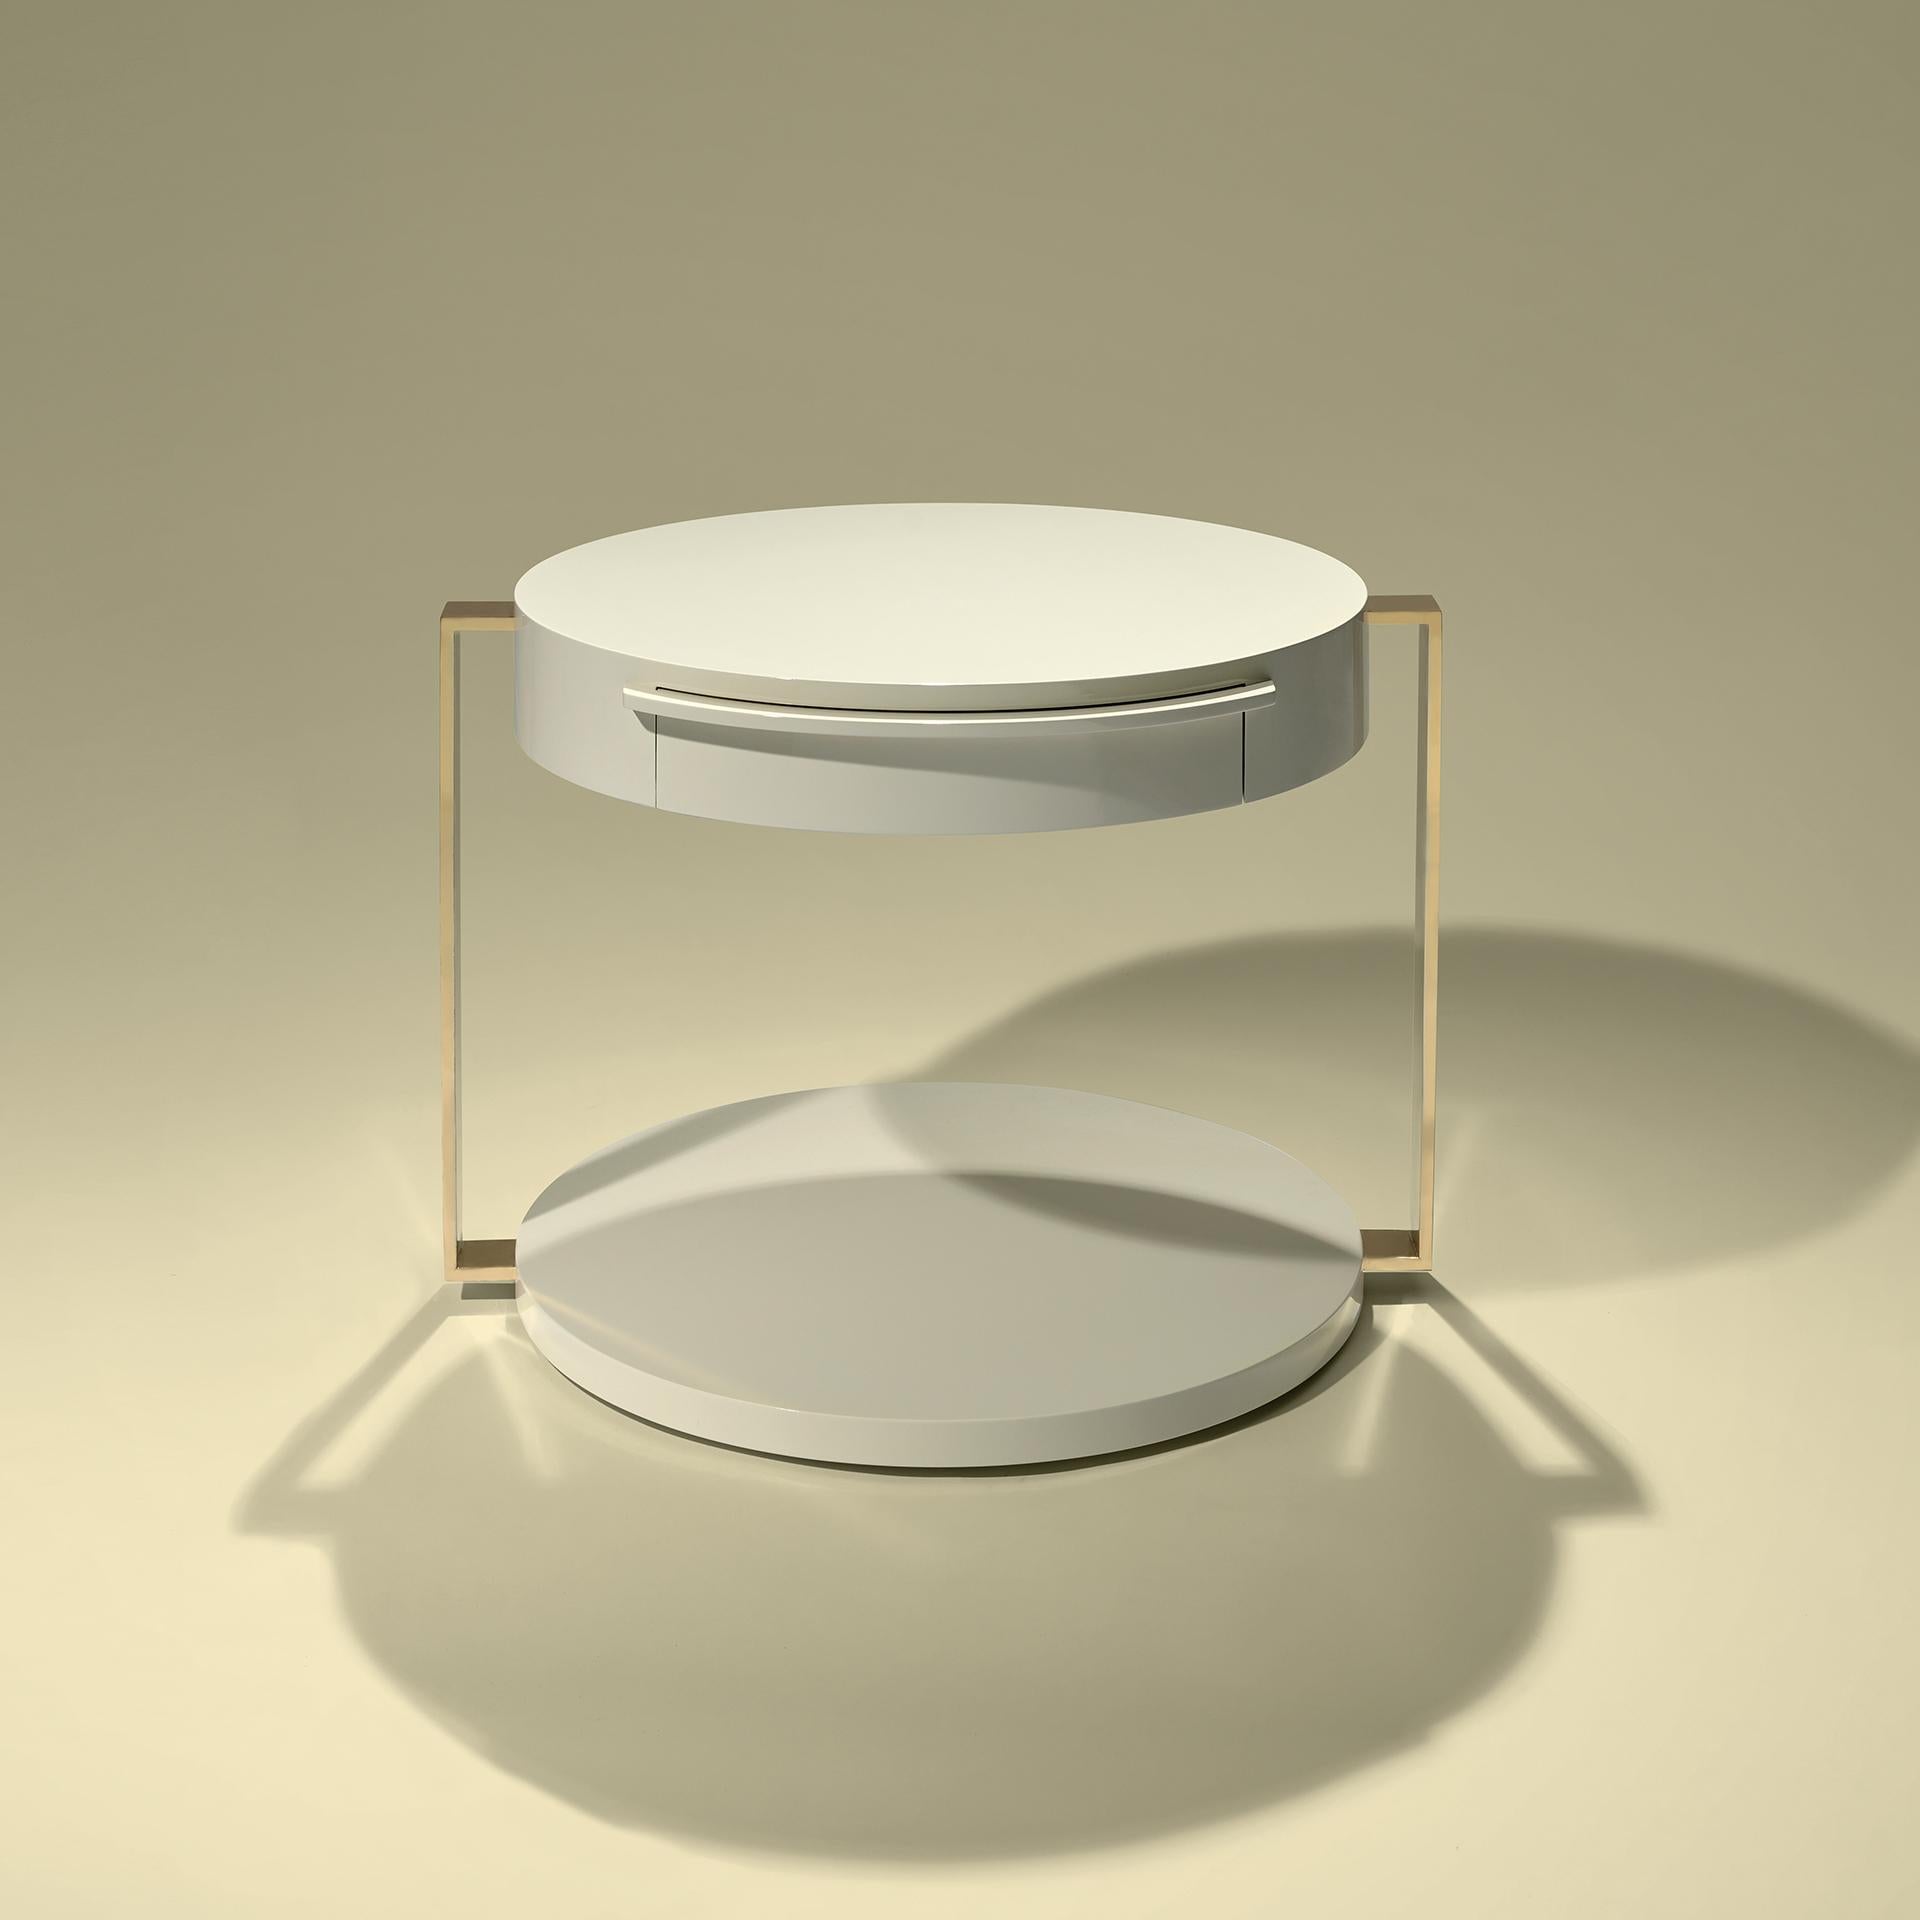 Square gold support or bedside table with one drawer in lacquer and gold metal - Ral colors available / wood.

Bespoke / Customizable
Identical shapes with different sizes and finishings.
All RAL colors available. (Mate / Half Gloss / Gloss)